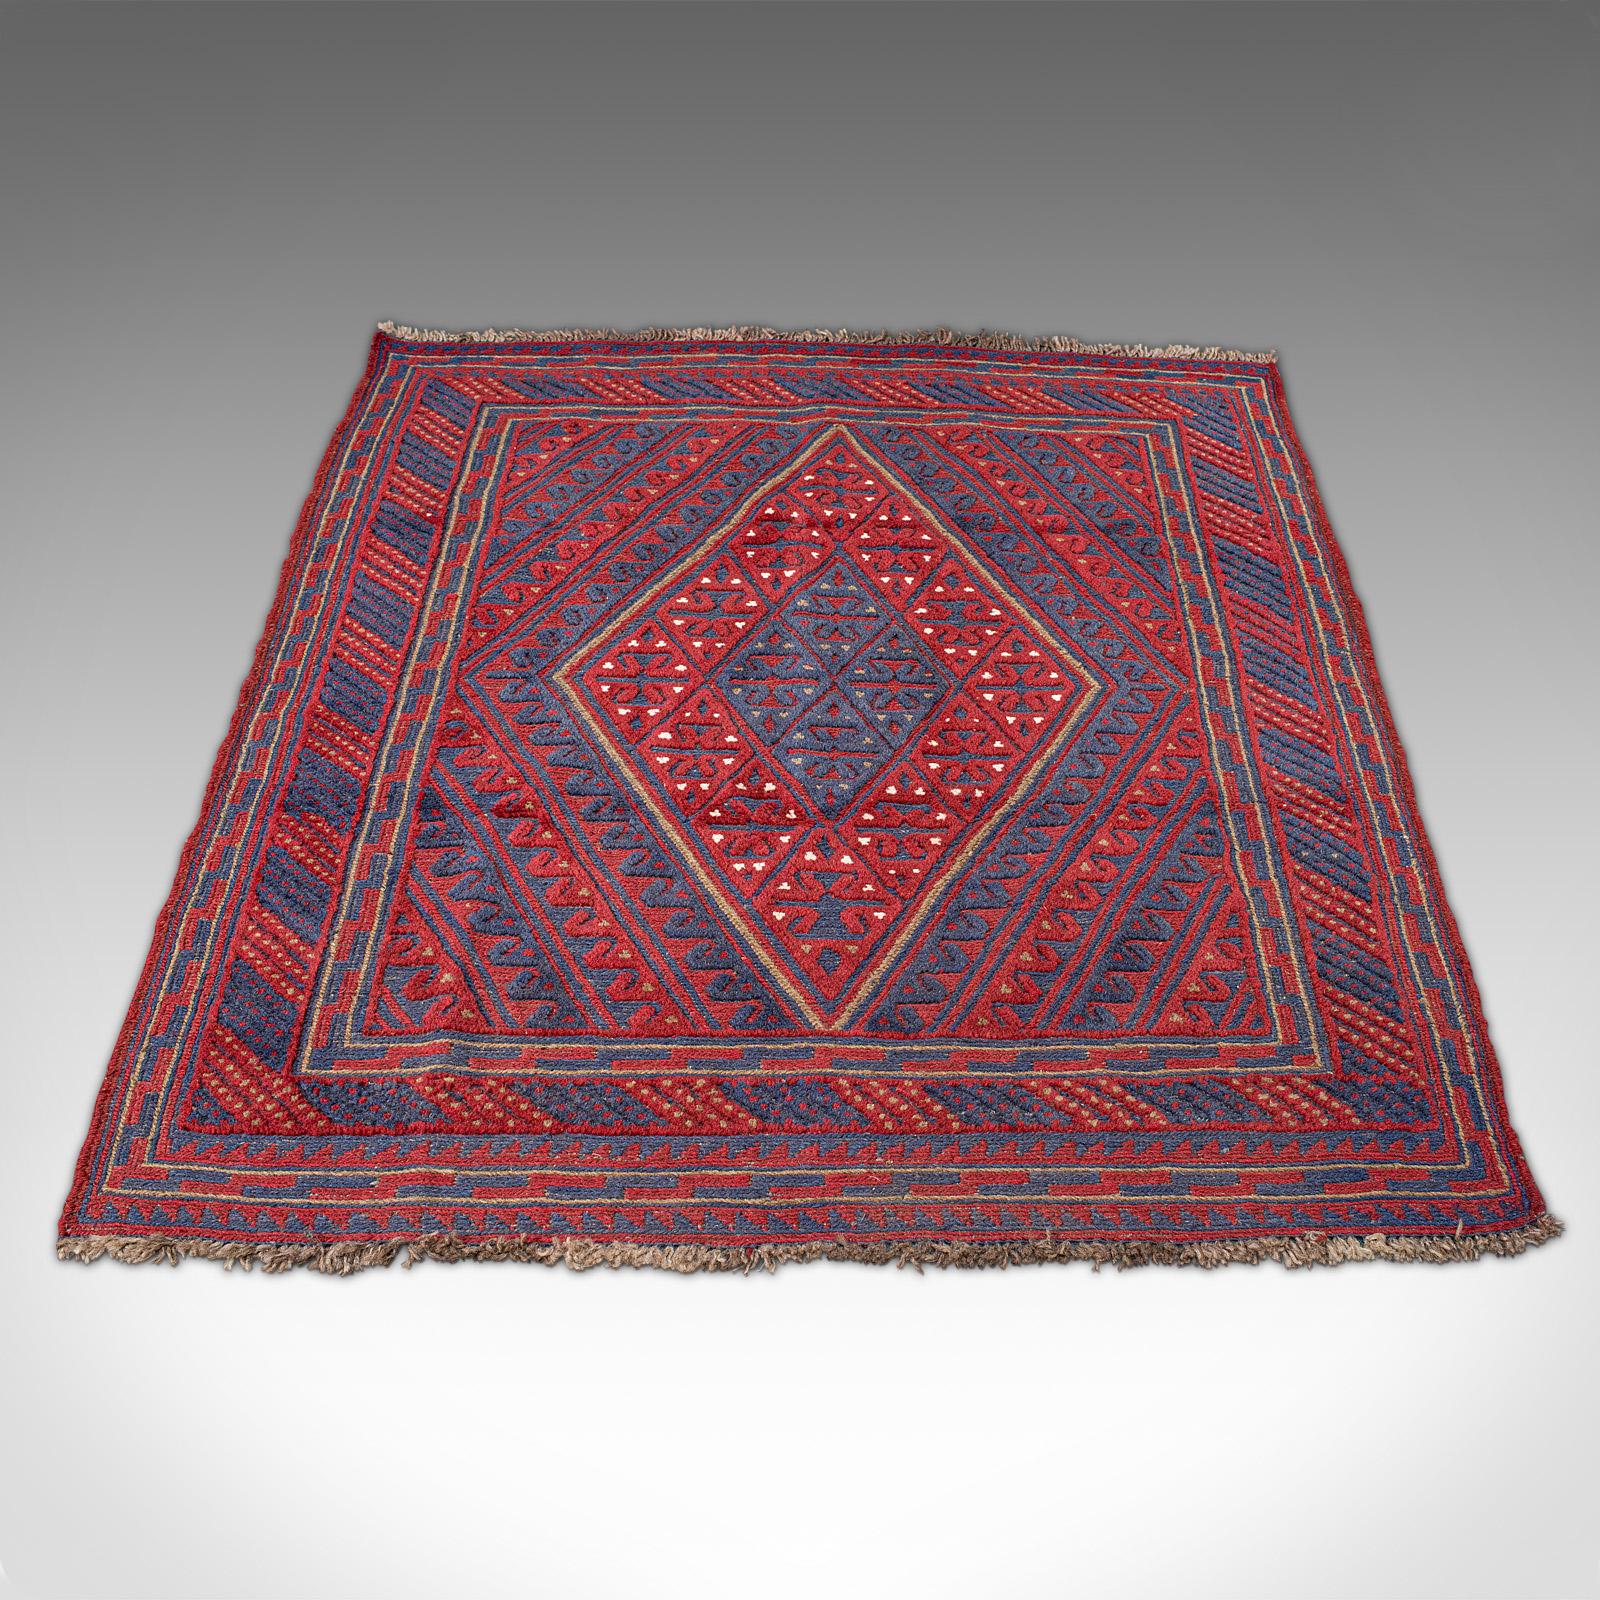 This is a vintage Meshwani Gazek rug. A Caucasian, woven hall or living room carpet, dating to the late 20th century.

Of useful Zaranim size at 108.5cm x 121cm - ideal for a doorway or lounge
Artisan hand-crafted using traditional skills with